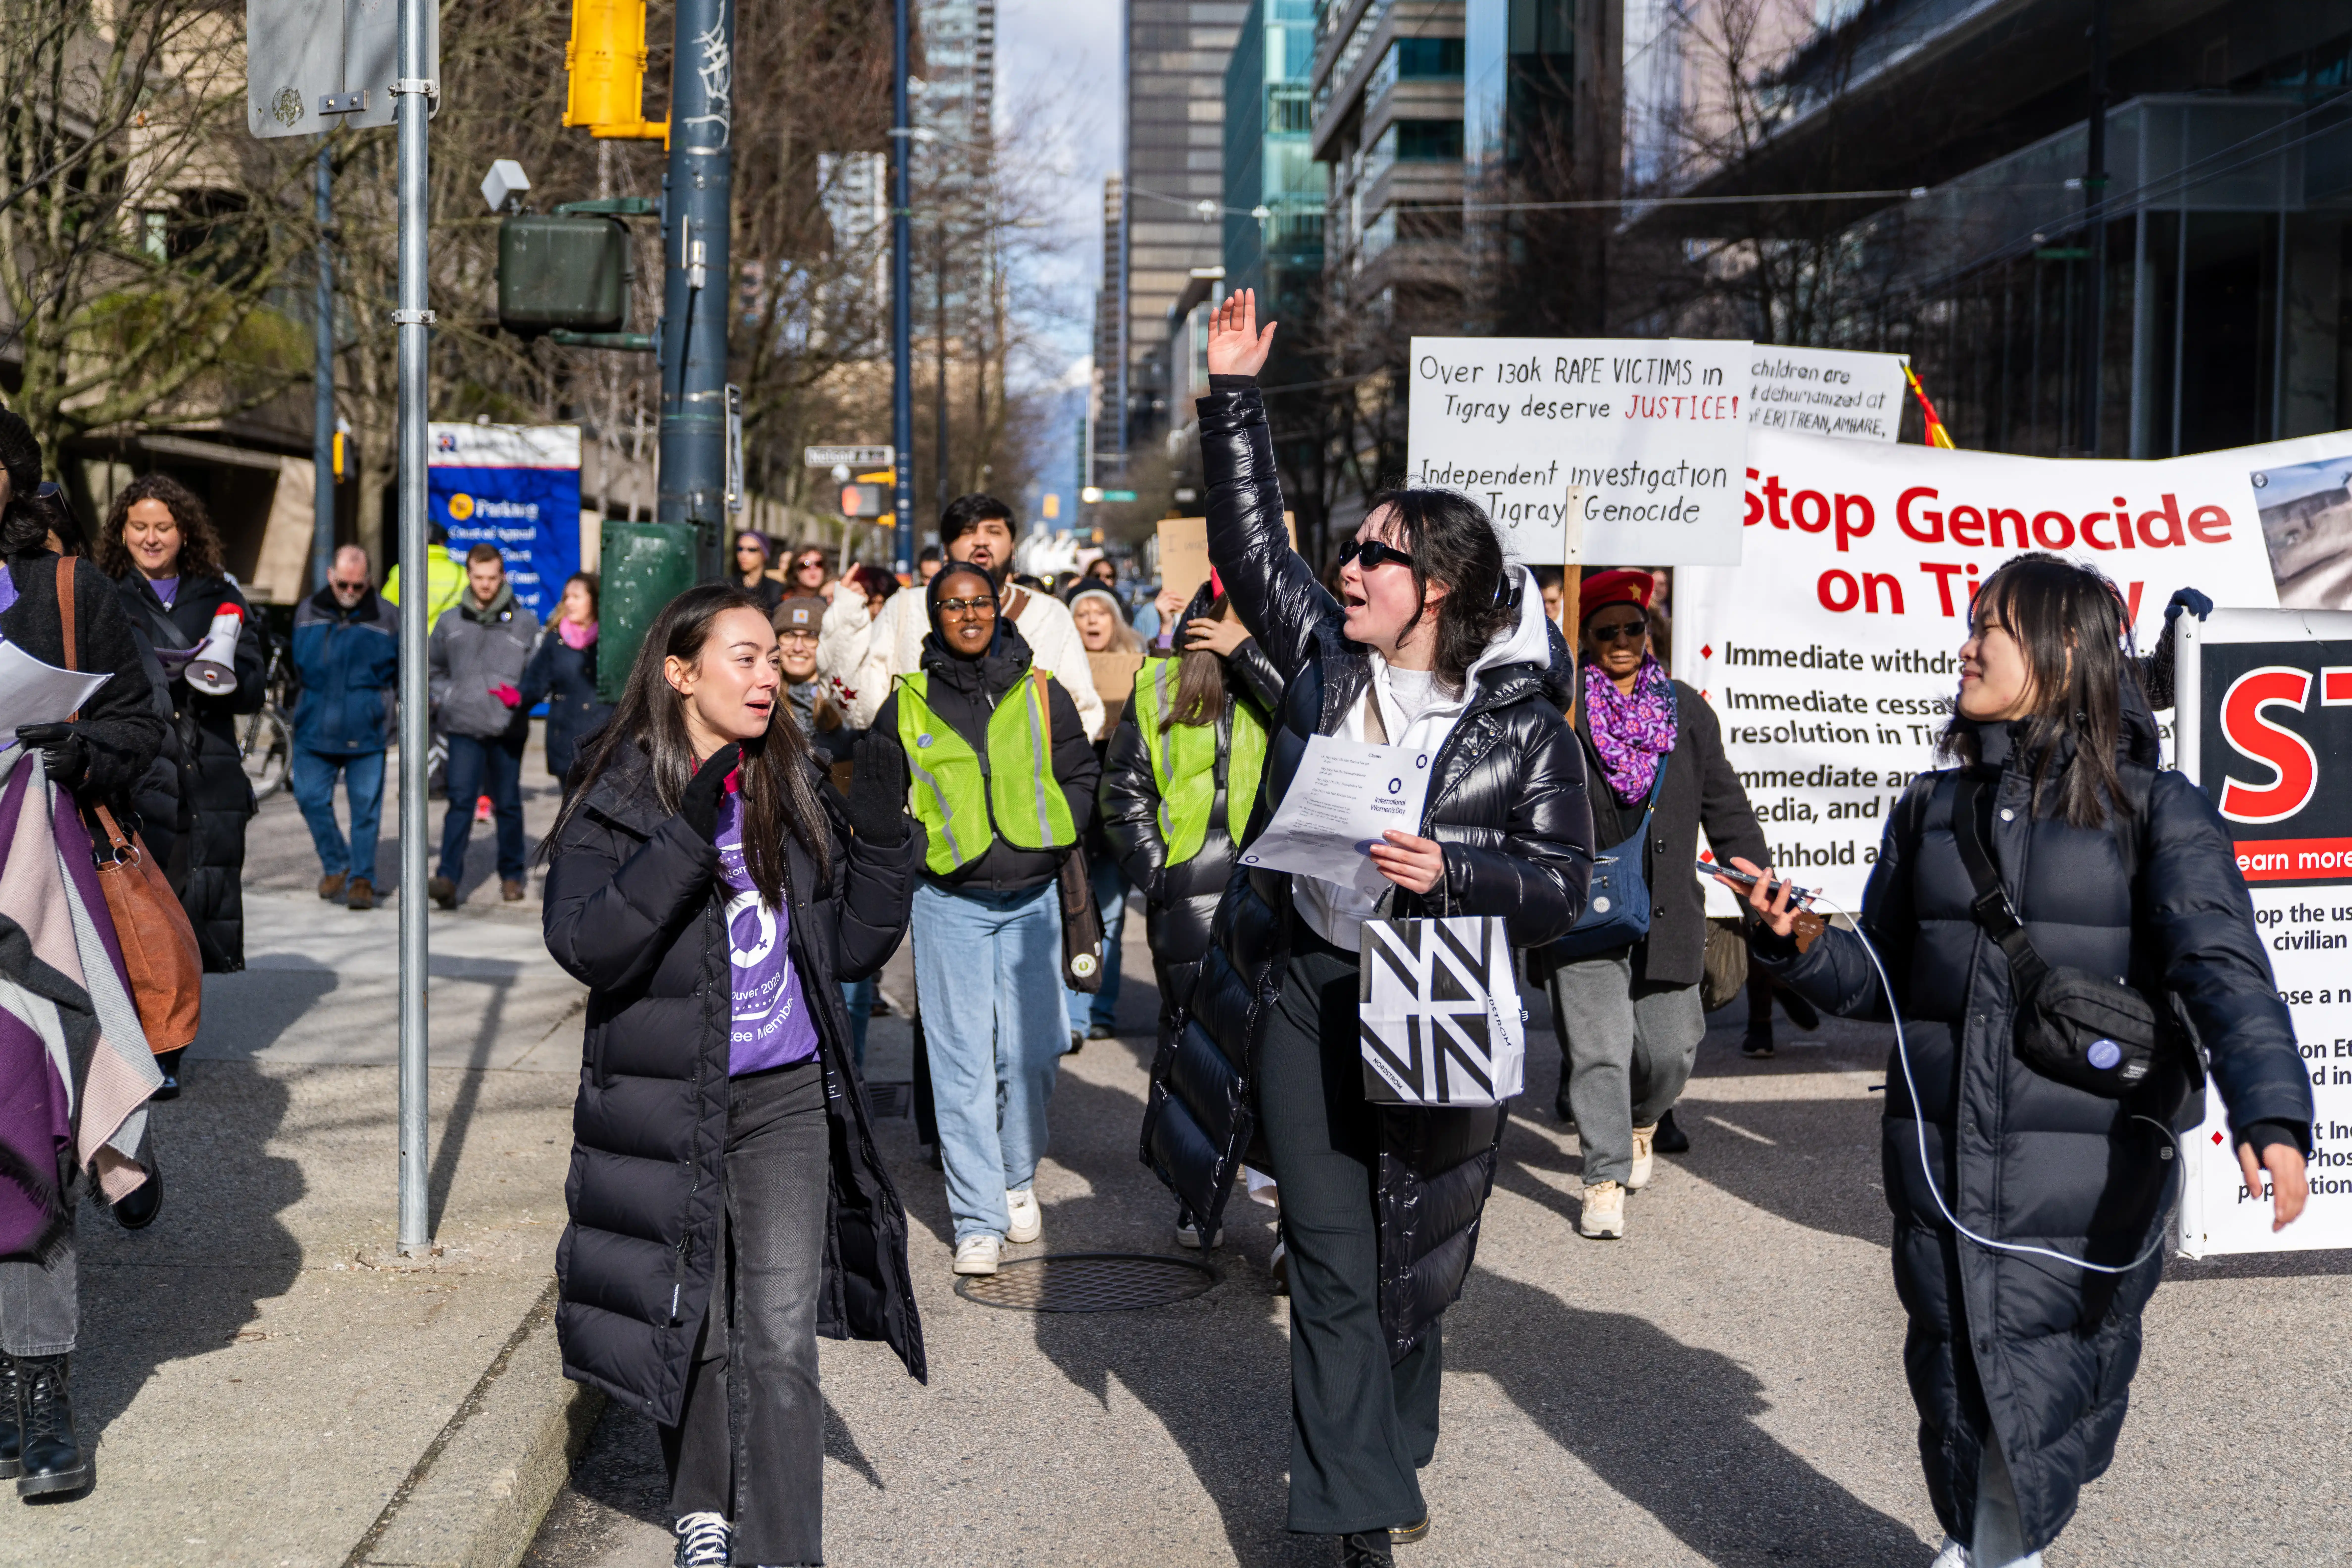 This is a photo of the march participants from the 2023 Vancouver event. The marchers are walking towards the camera, dressed in warm winter coats. Many are holding signs, clapping, and smiling.